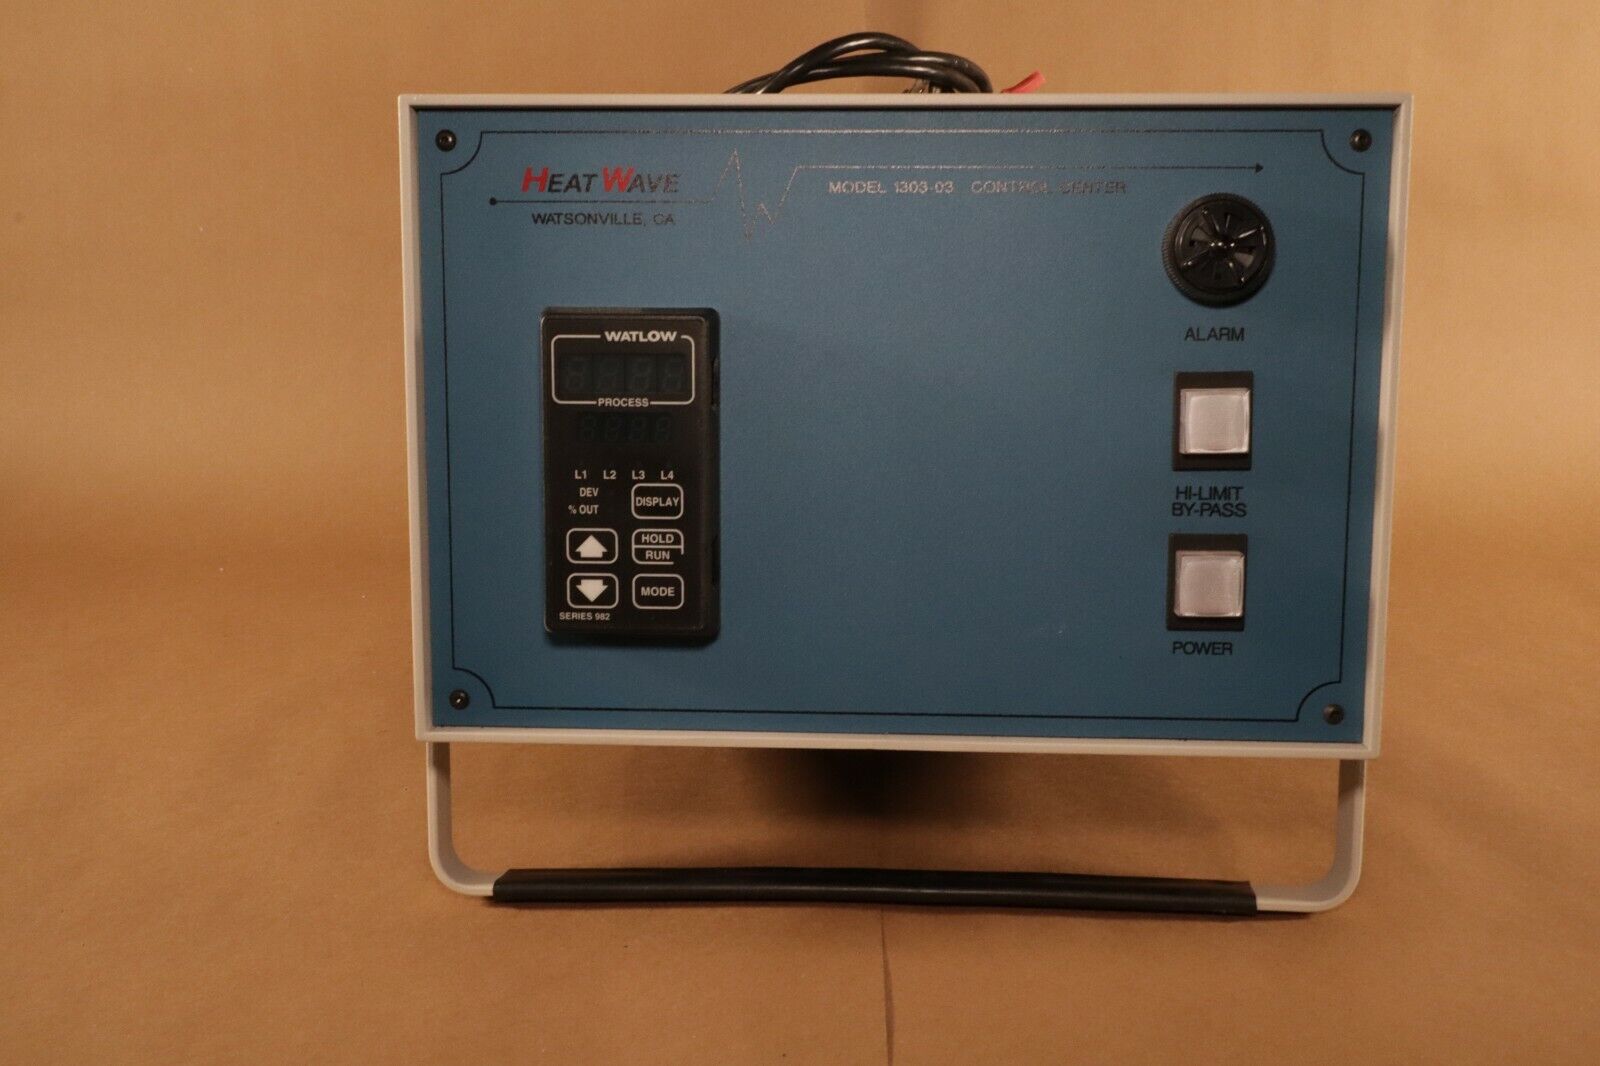 Heatwave Labs Model 1303-03 Control Center With Manual, Temperature Controller